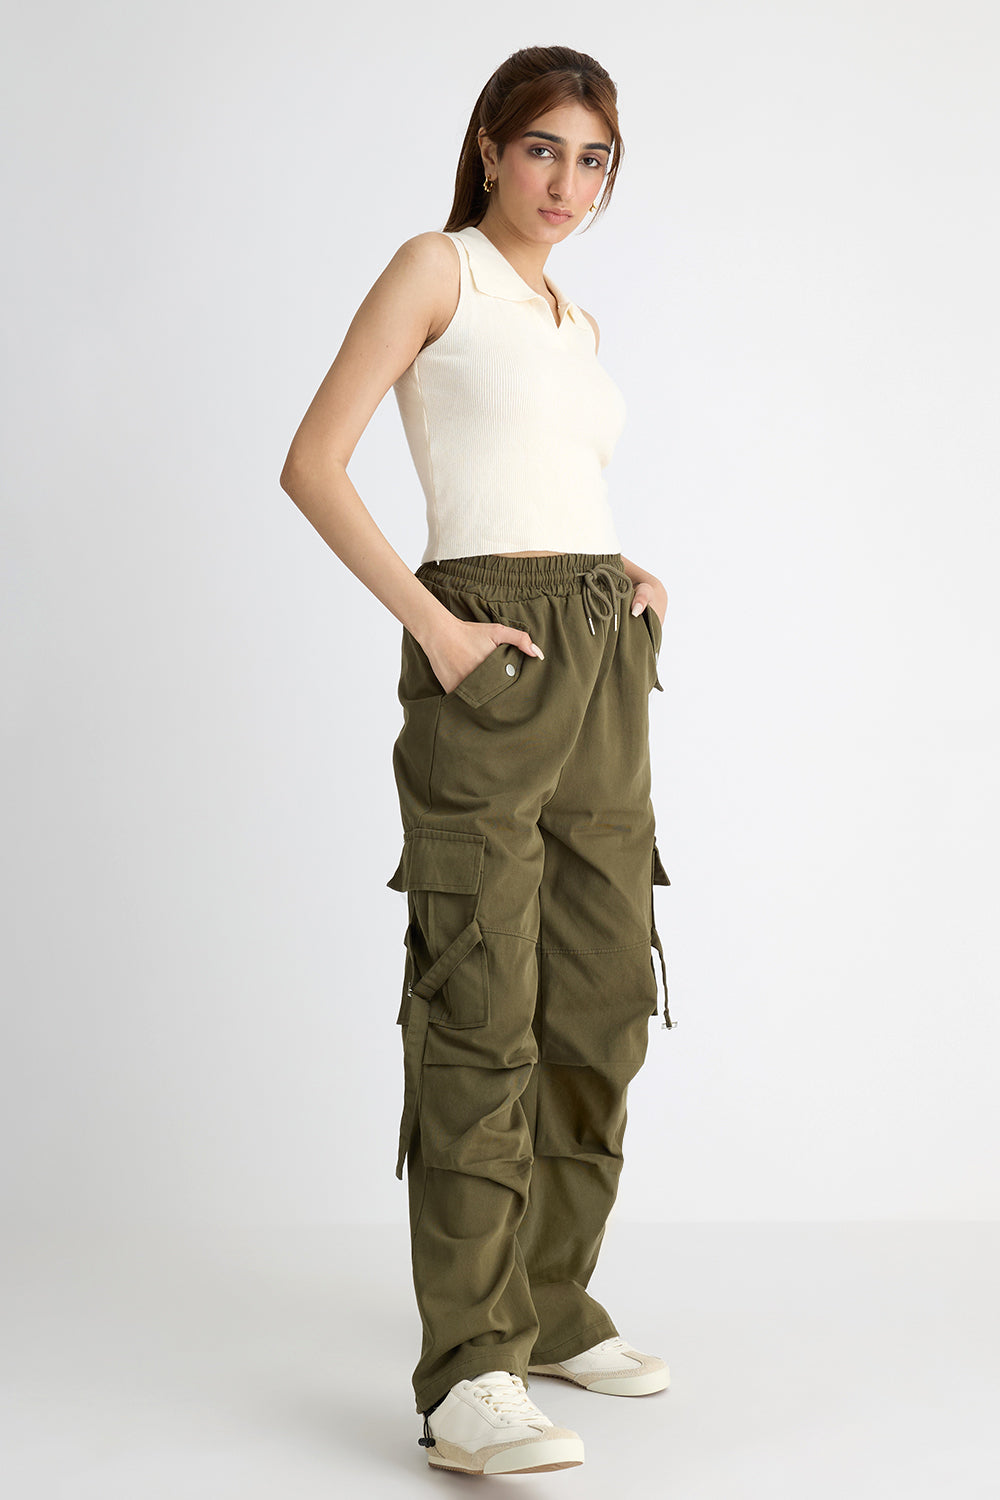 Calsunbaby Women Casual Cargo Pants Adults Female Loose Solid Color Zipper  Trousers with Pockets